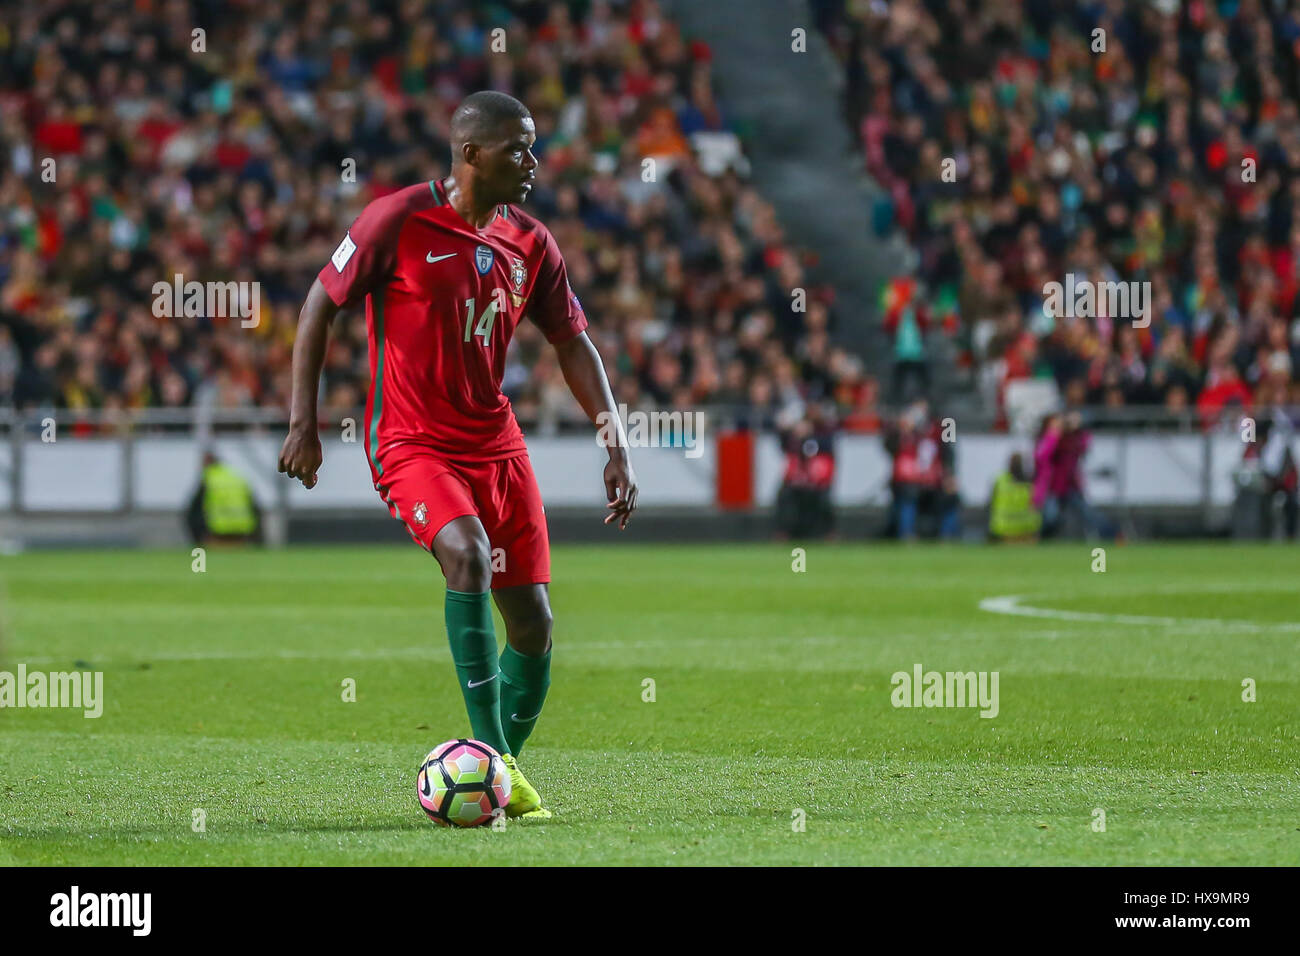 March 25, 2017. Lisbon, Portugal. Portugal's midfielder William Carvalho (14) during the FIFA 2018 World Cup Qualifier between Portugal v Hungary Credit: Alexandre de Sousa/Alamy Live News Stock Photo